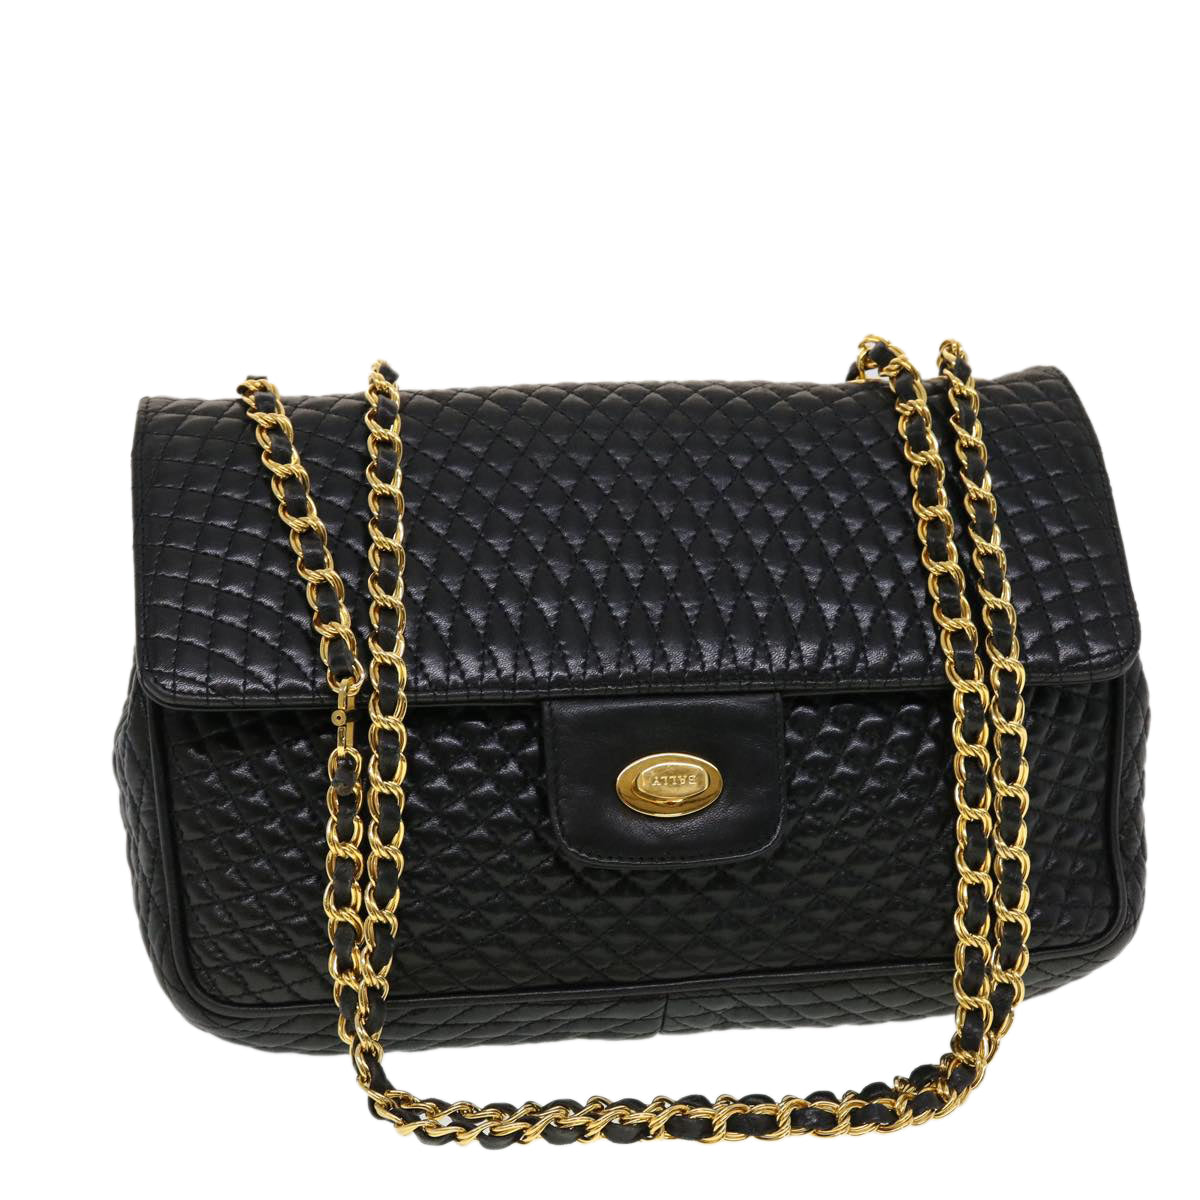 BALLY Chain Shoulder Bag Leather Black Auth 43256